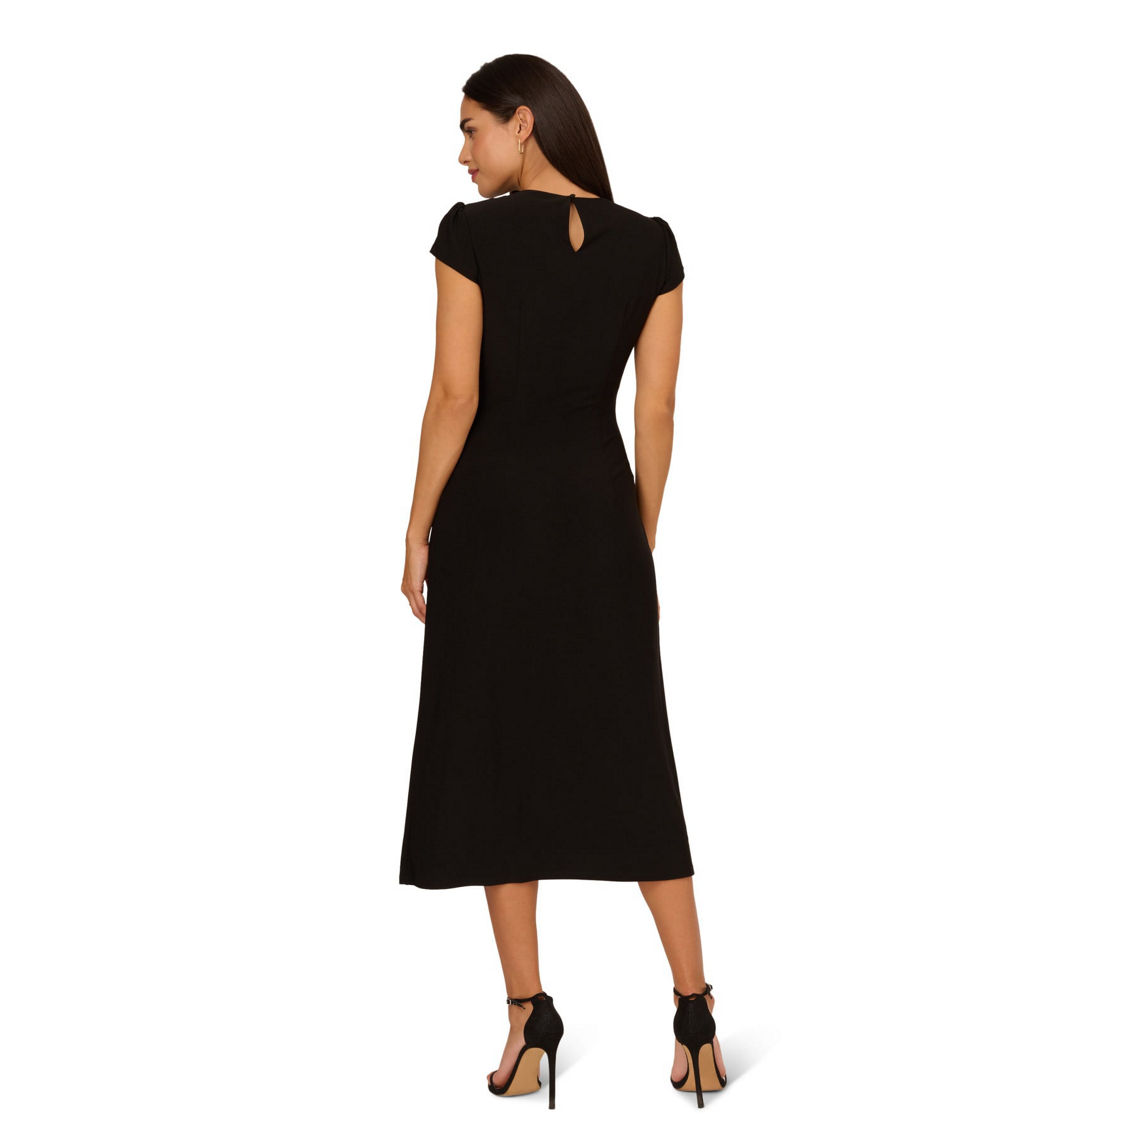 Adrianna Papell Jersey Midi Dress Cap Sleeves - Image 2 of 5